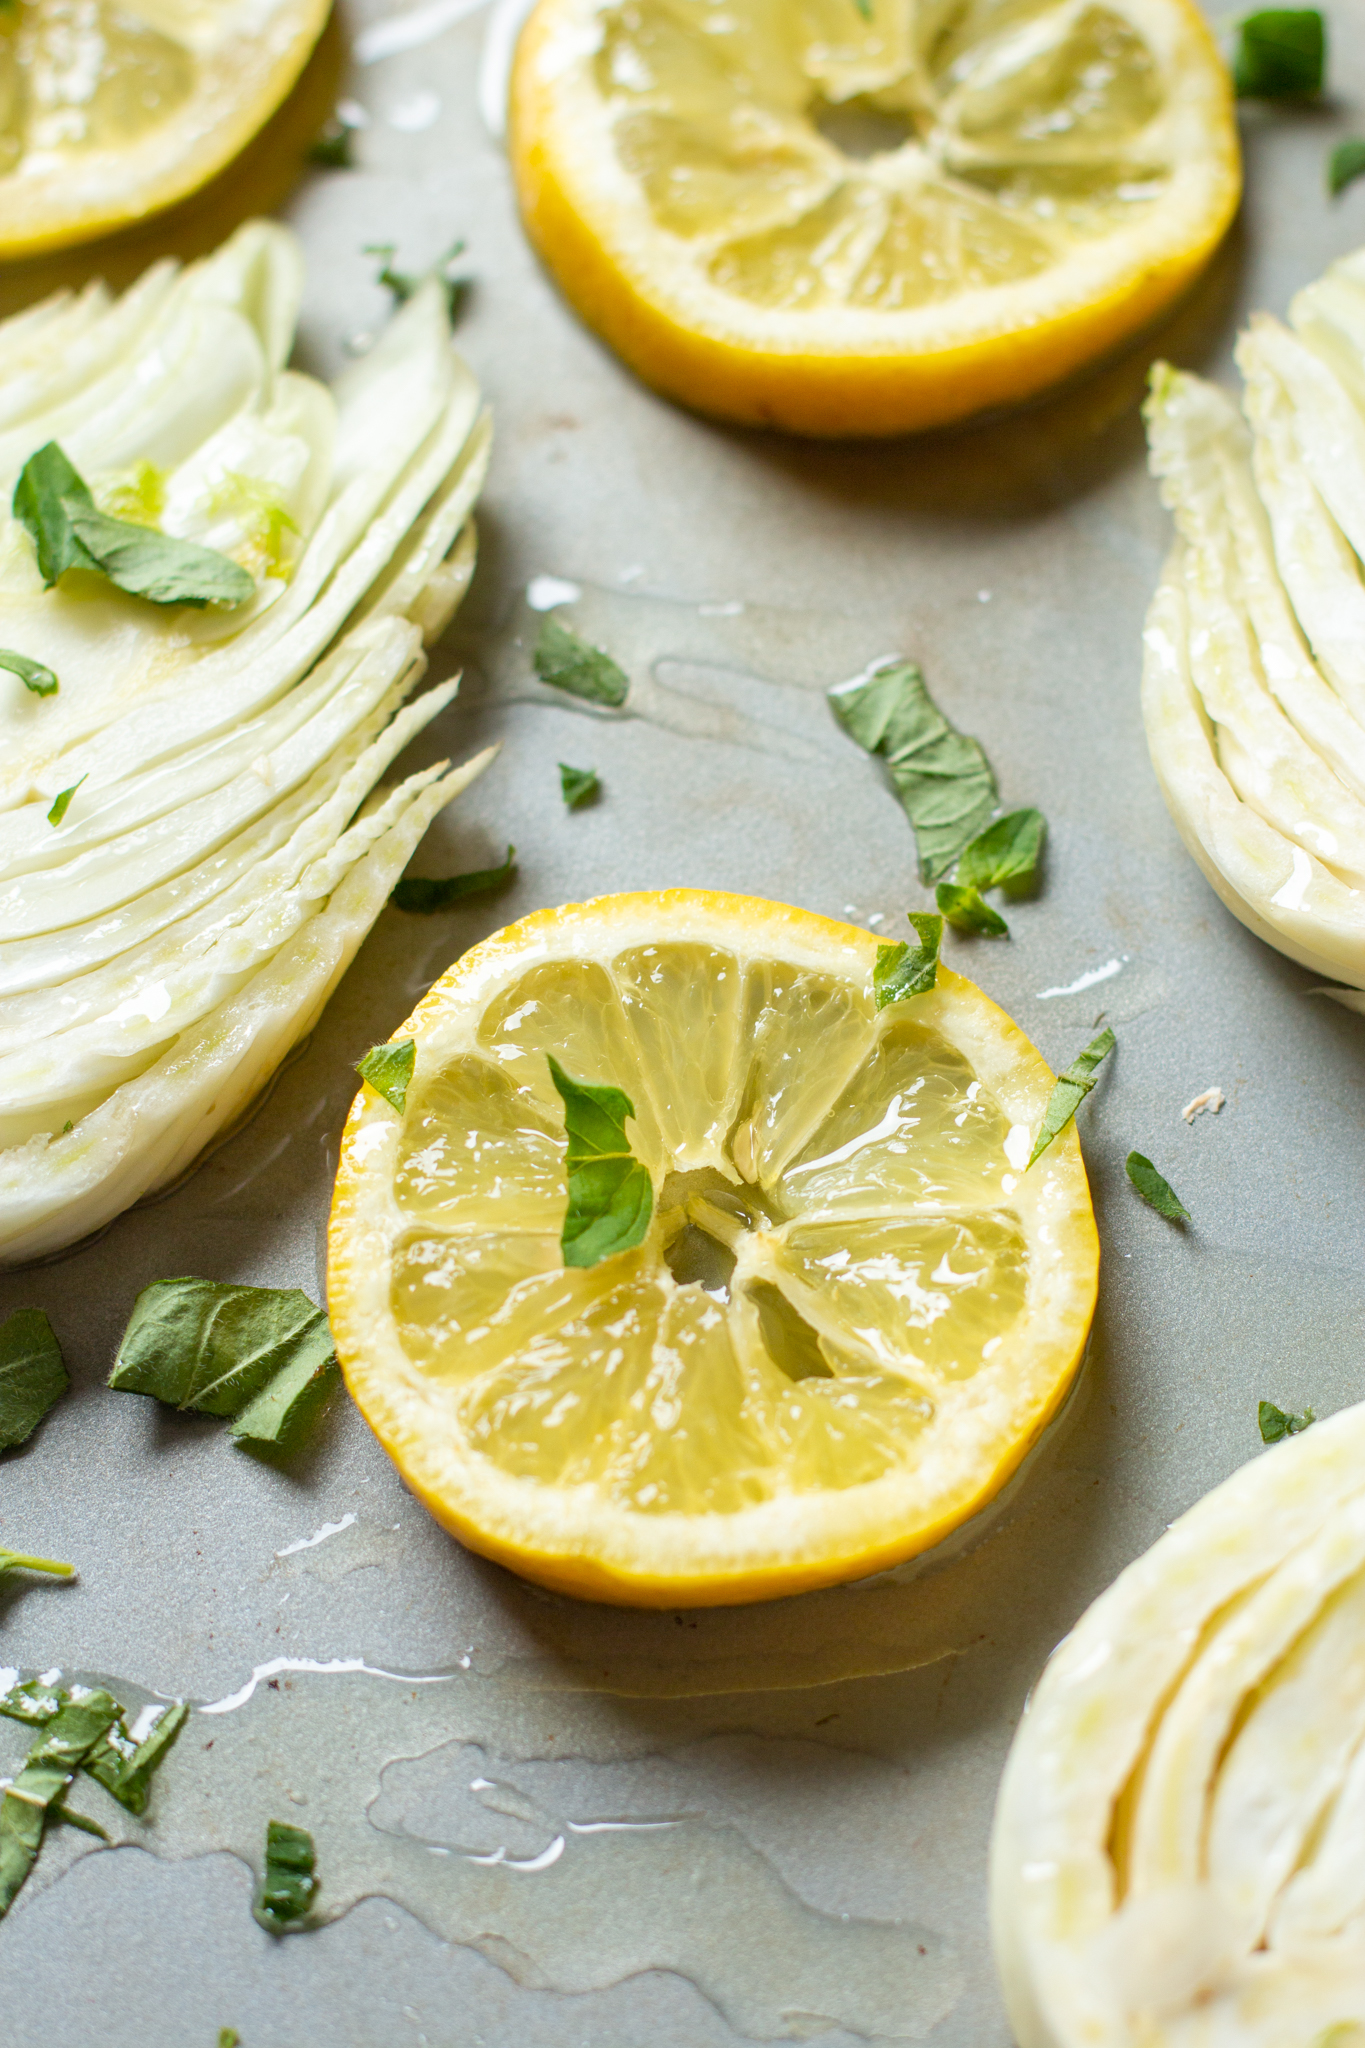 a photo of a slice of lemon and fennel on a baking sheet with herbs